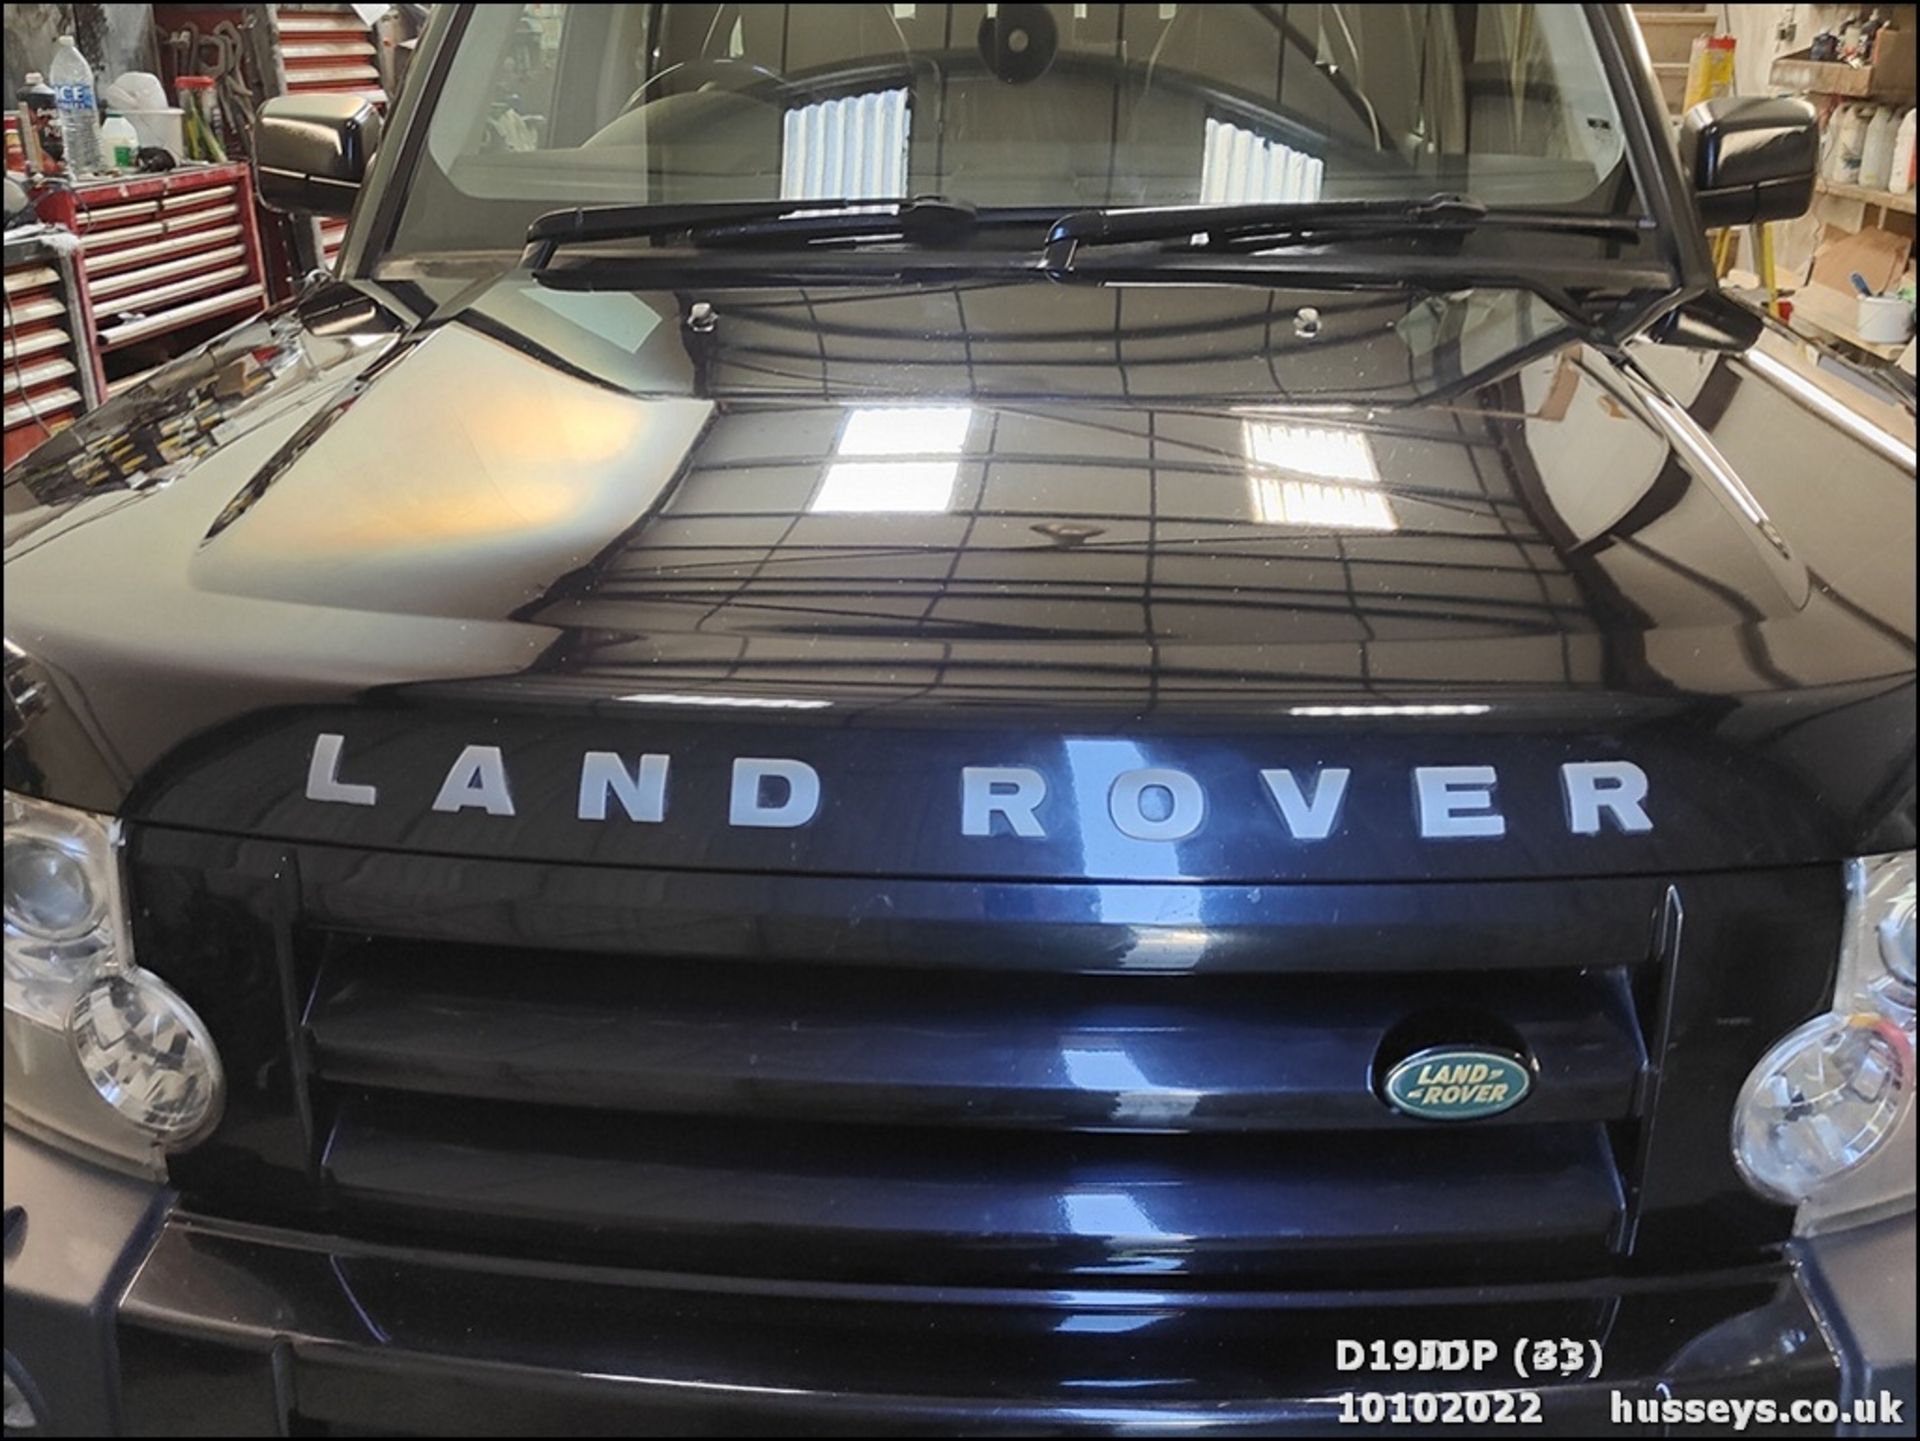 2008 LAND ROVER DISCOVERY TDV6 HSE A - 2720cc 5dr Estate (Blue, 164k) - Image 34 of 36